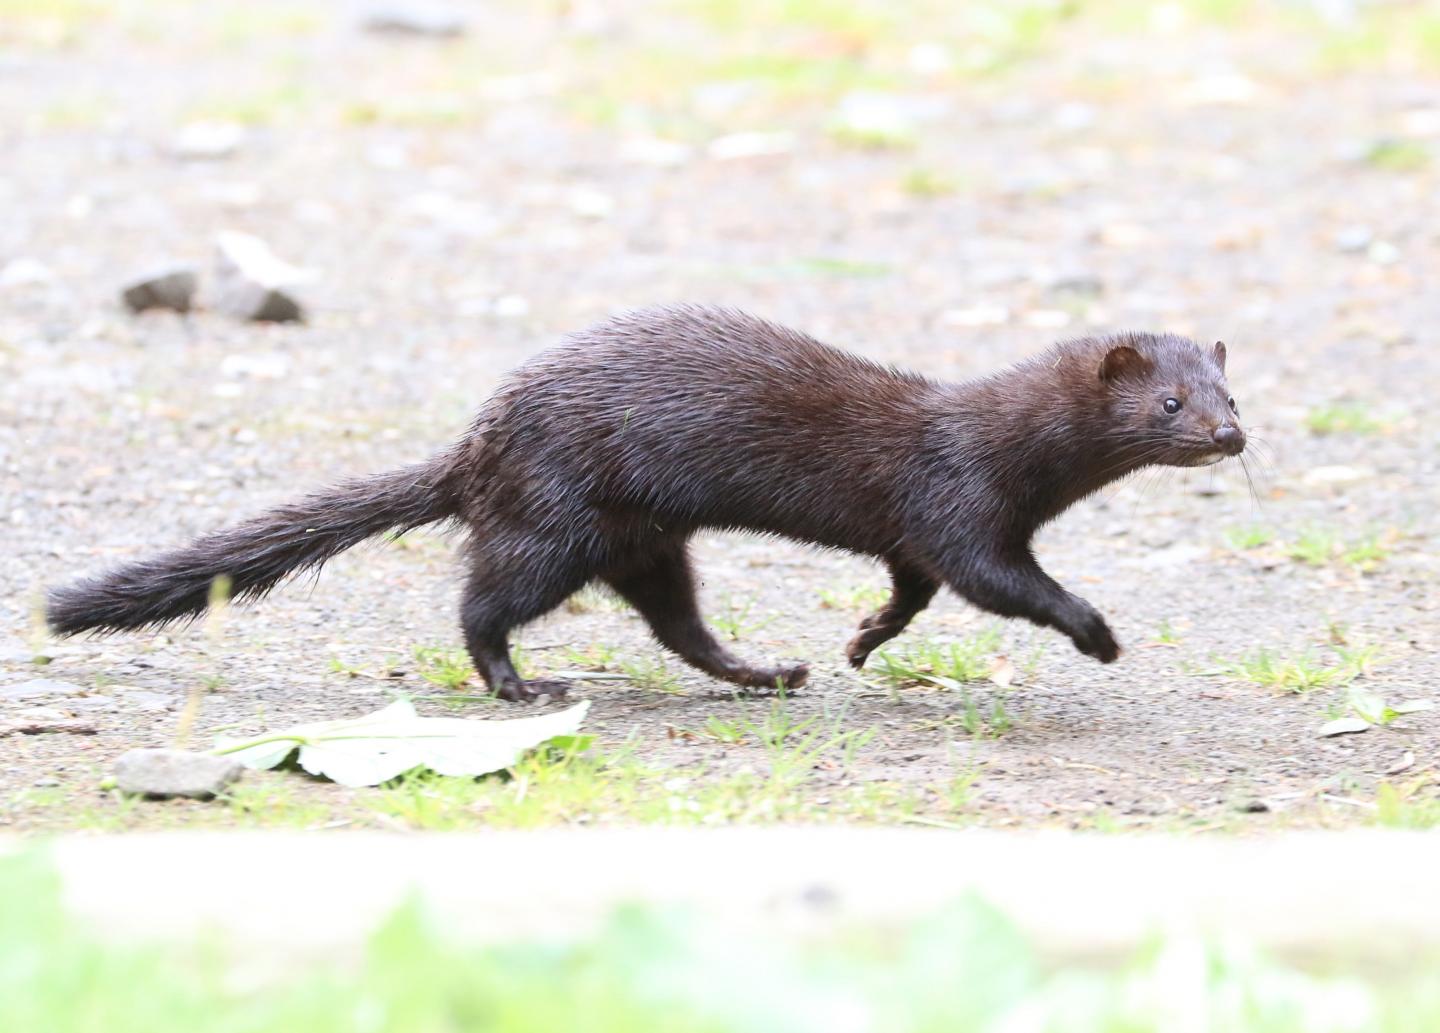 An American mink walking in a national park